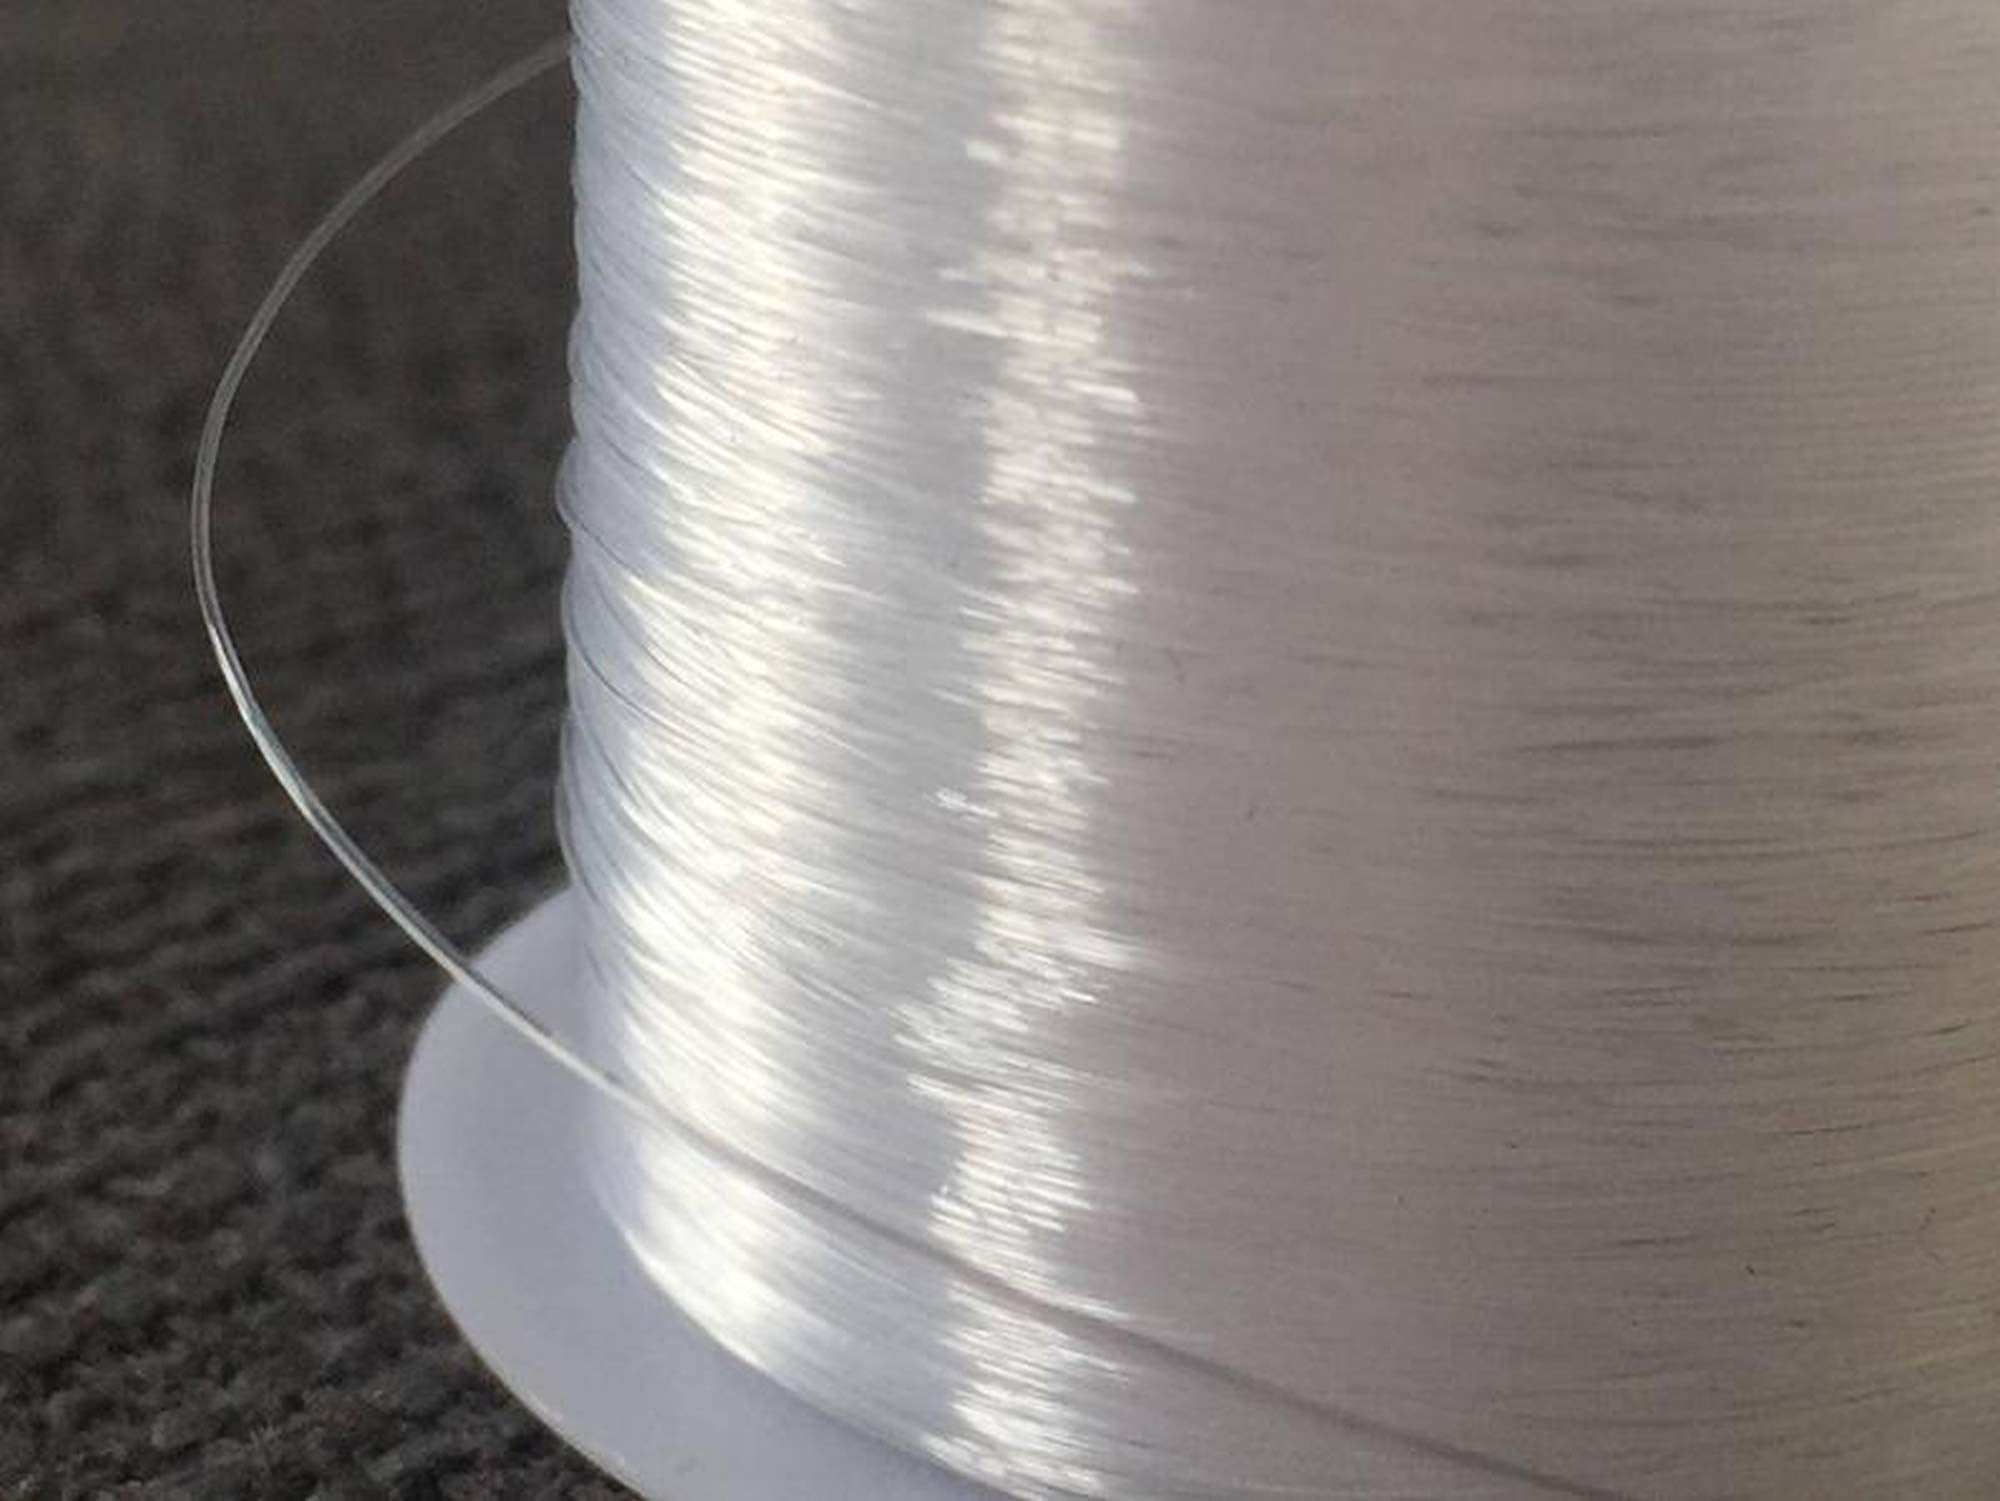 0.25mm Clear Nylon Thread Invisible String Non Stretch Clear Fishing Wire Transparent Plastic Sewing Thread For Hanging Decorations Craft Party Balloon Arch Beading & Jewellery Making - Approx Tensile Strength 2.7kg (0.25mm x 100m - 5 Spools)